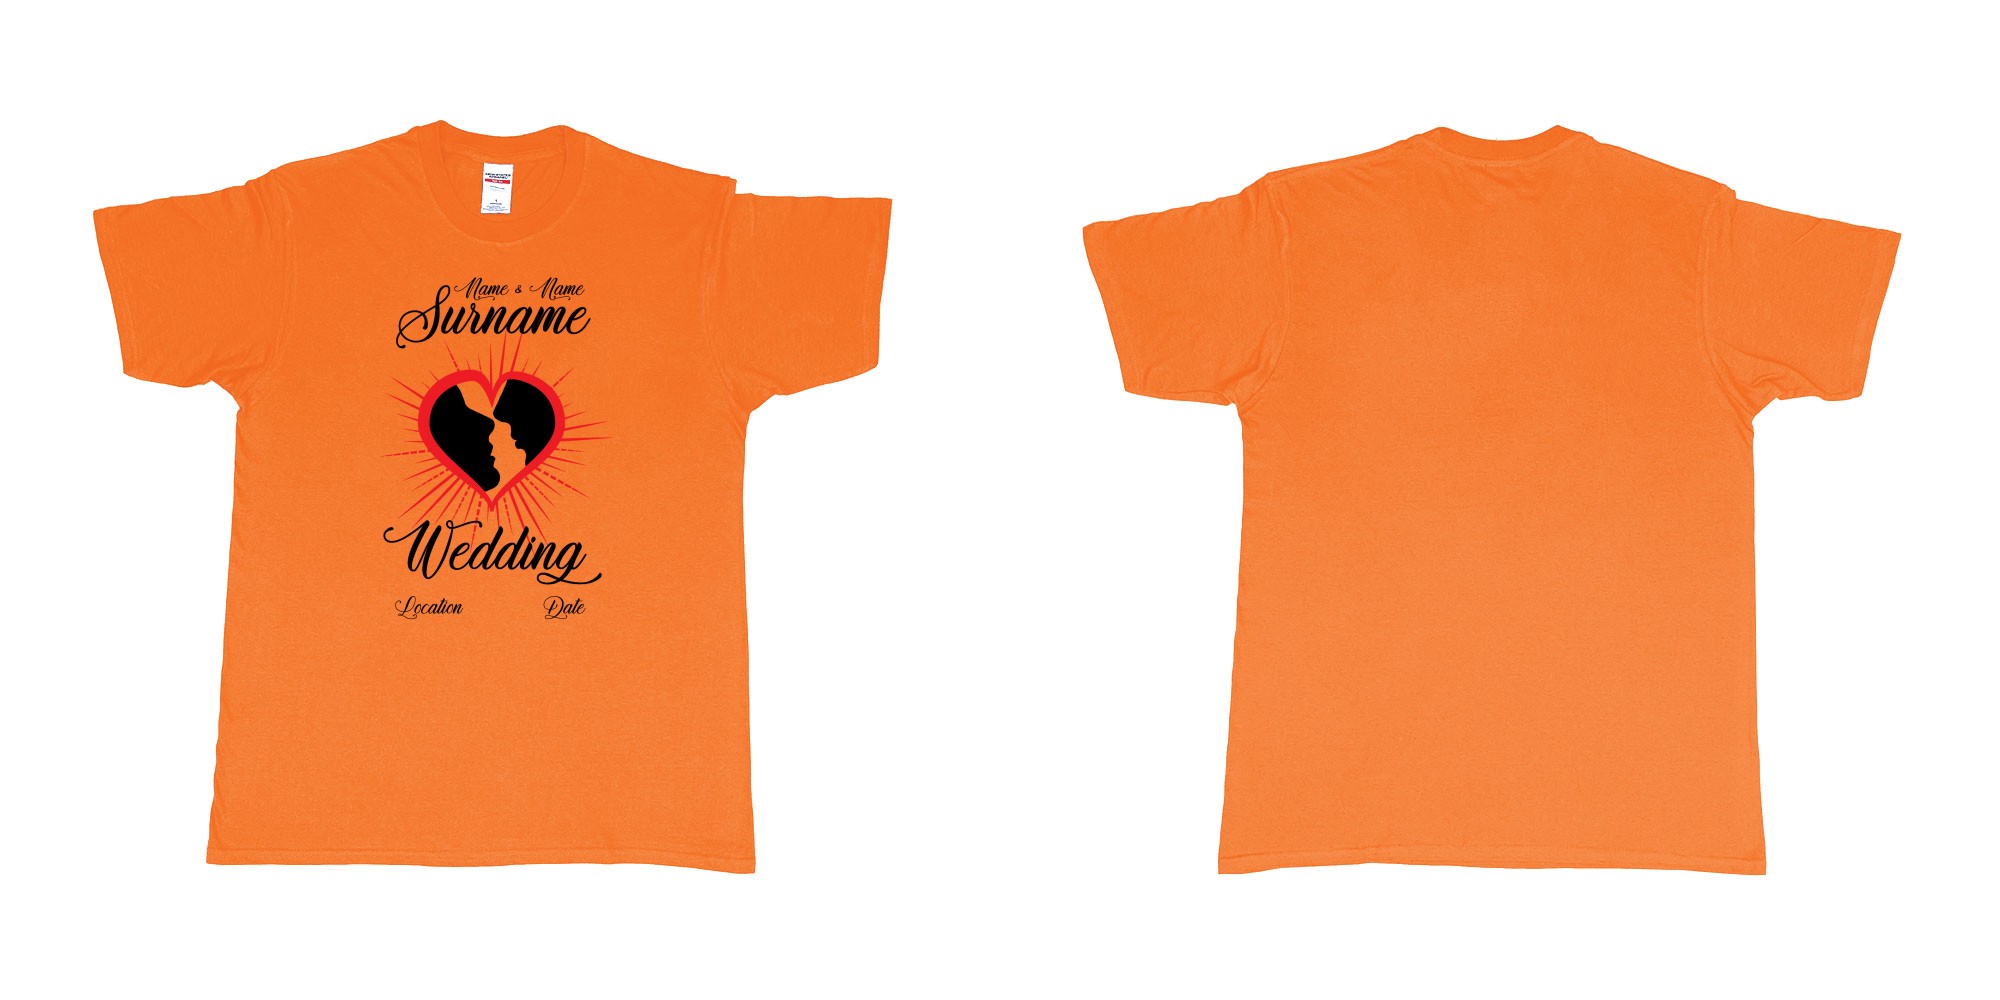 Custom tshirt design wedding heart kiss custom names surname location date bali in fabric color orange choice your own text made in Bali by The Pirate Way